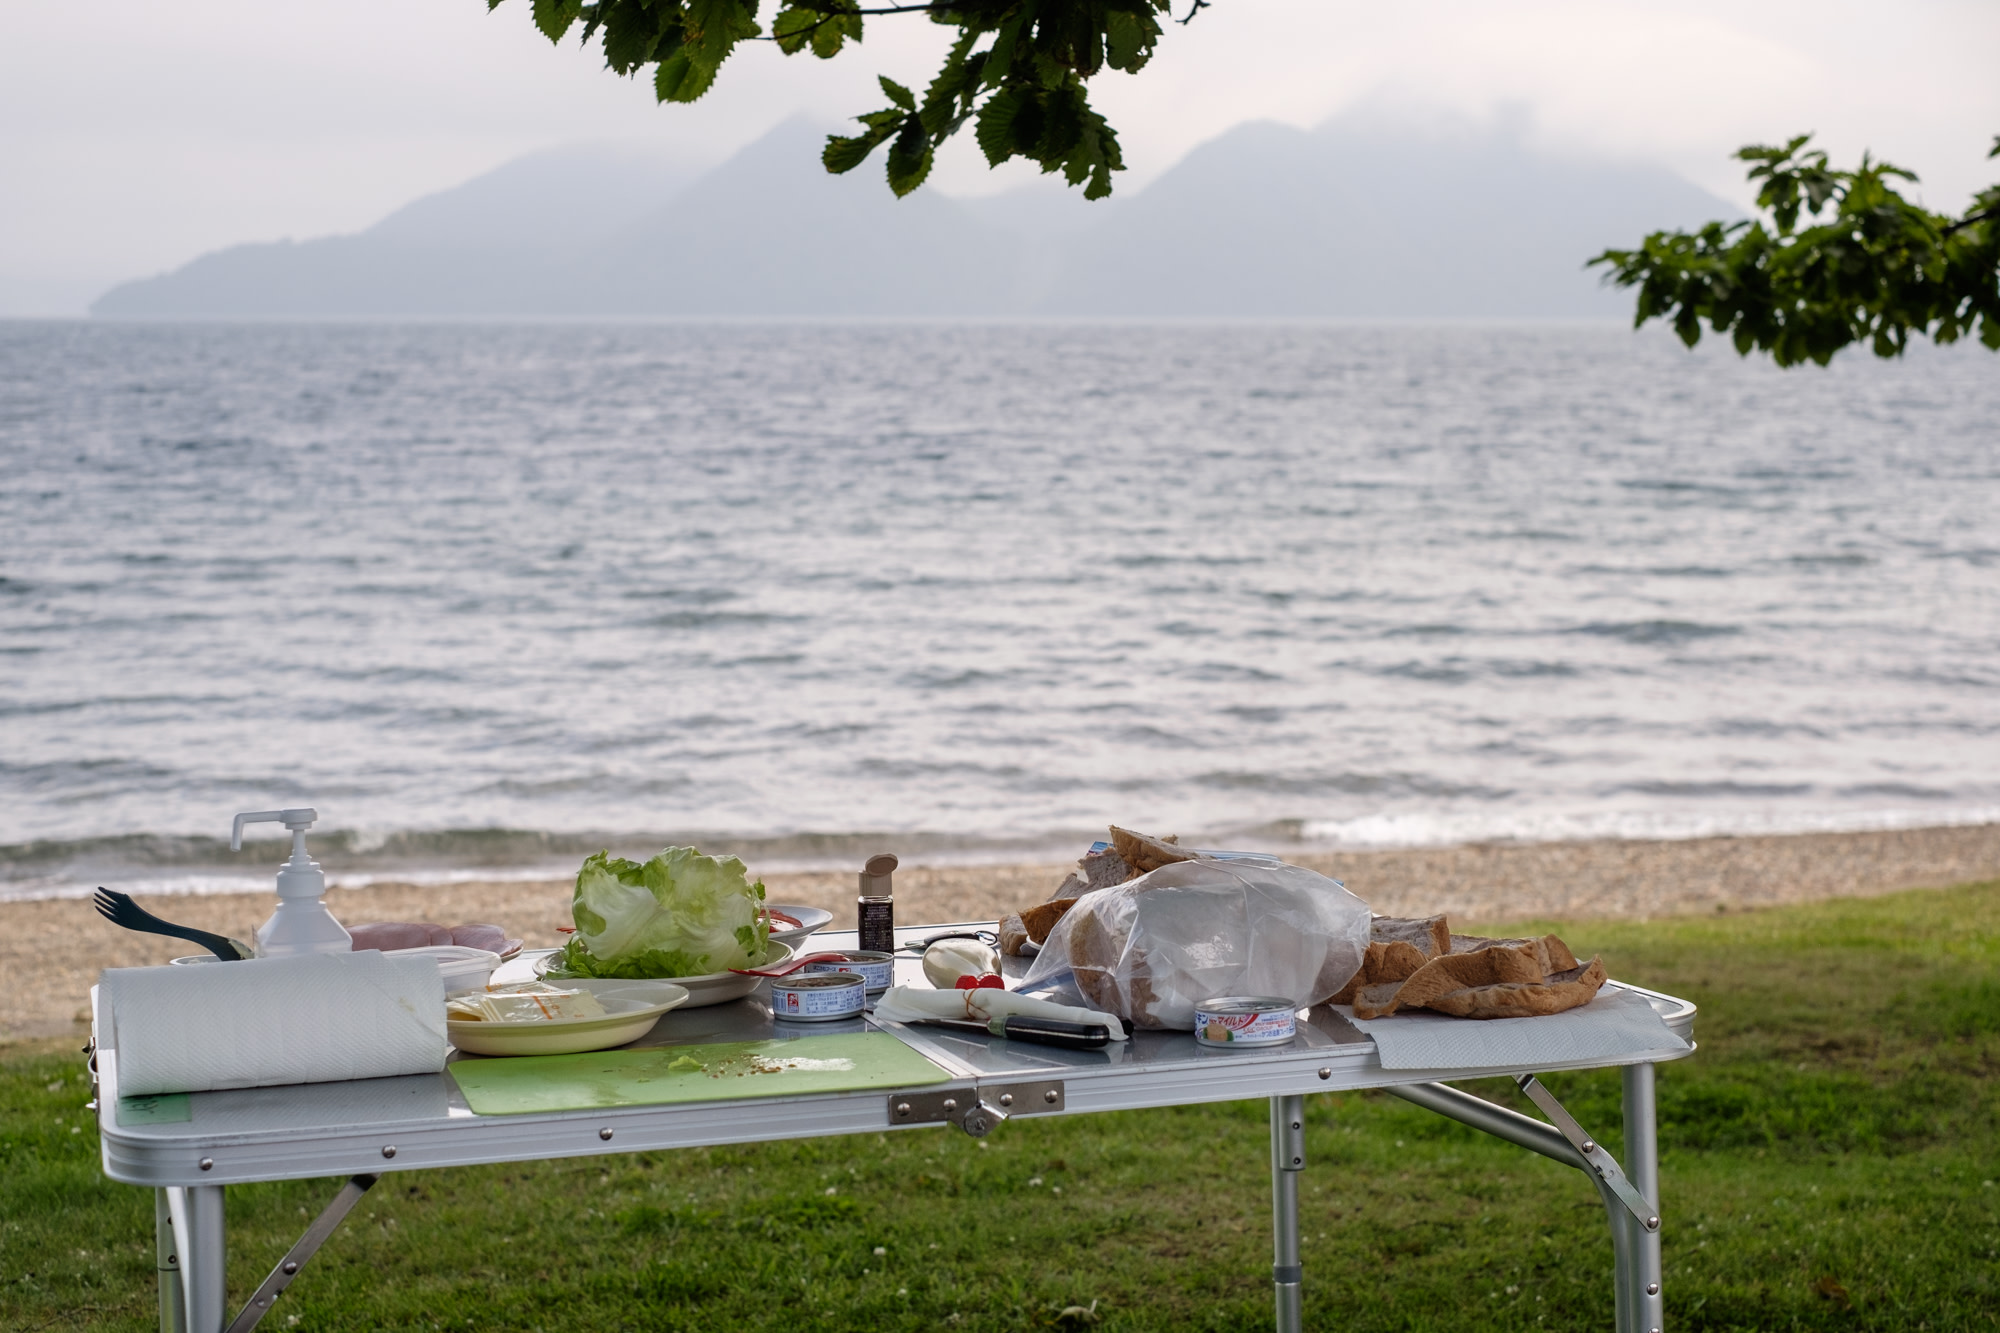 Lunch for a guided cycling tour laid out on a table on the shores of Lake Toya.